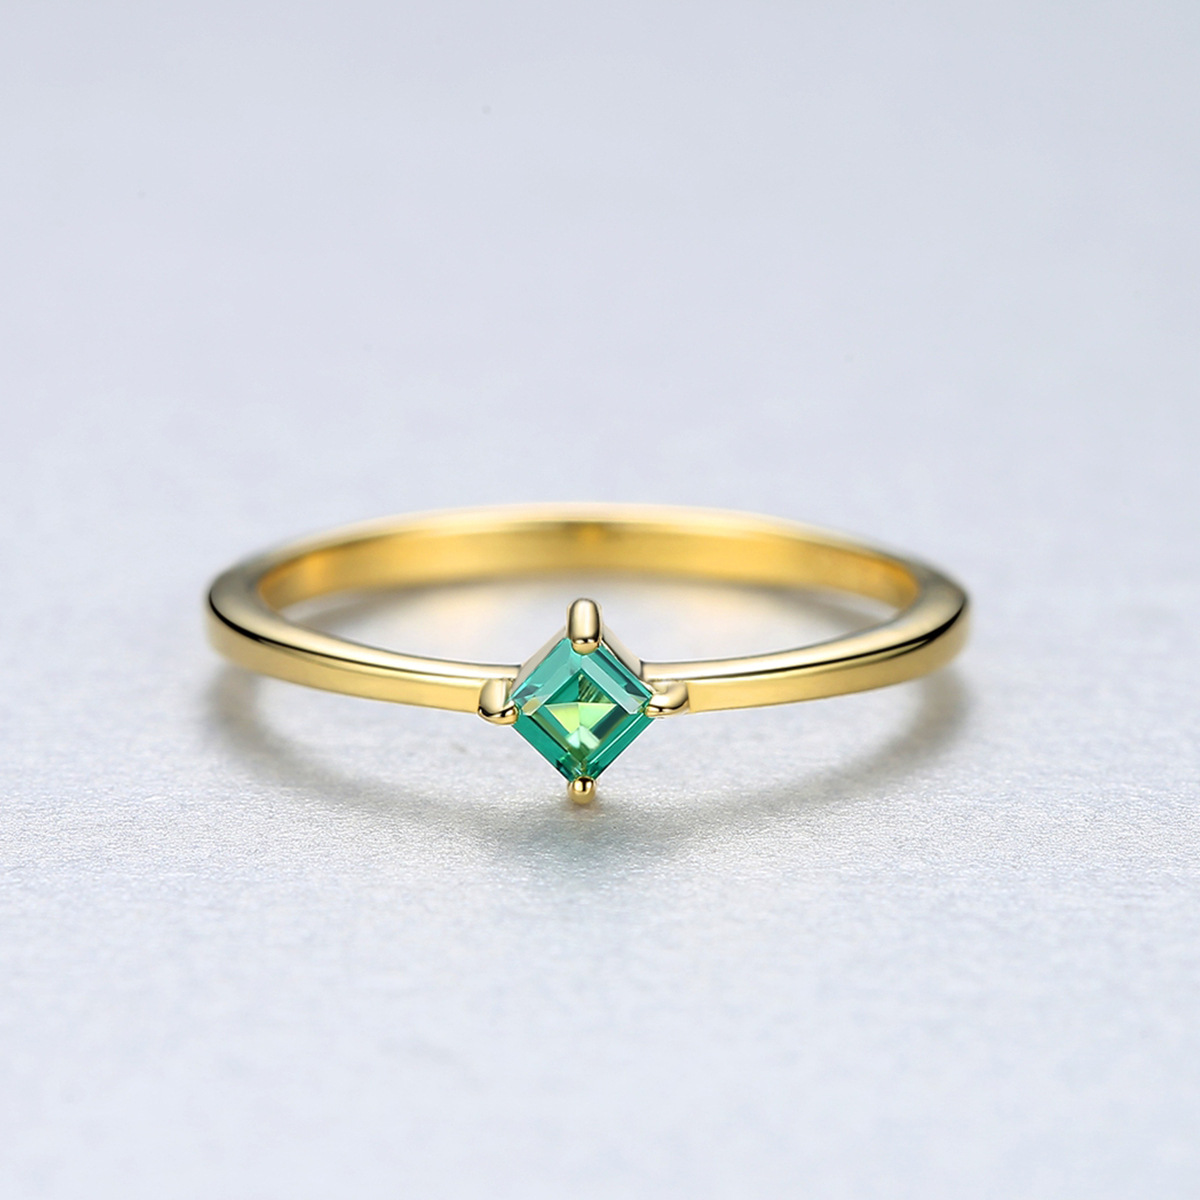 14K  Gold Plated Sterling Silver Green Cz  Ring